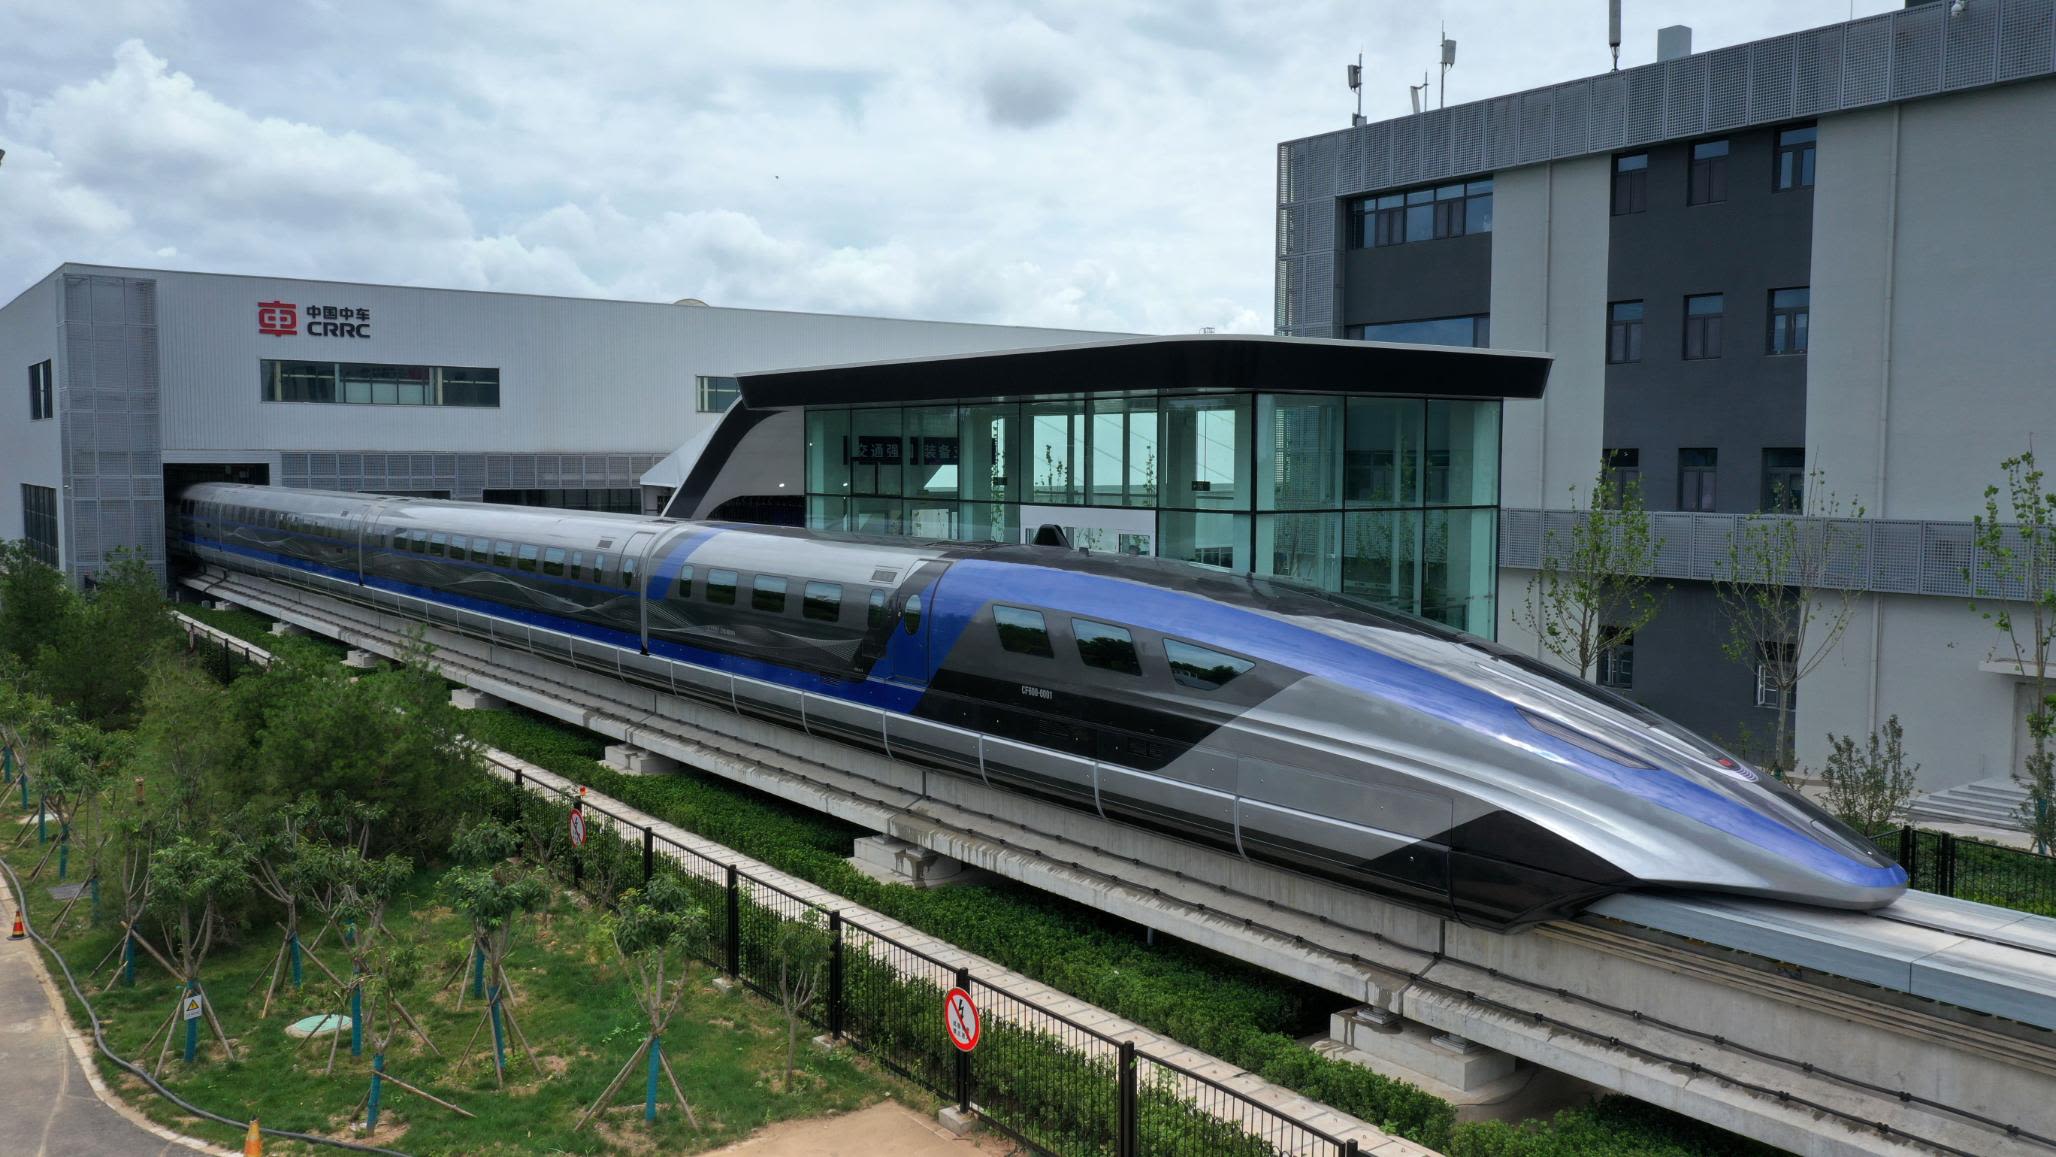 Flying without wings: The world's fastest trains